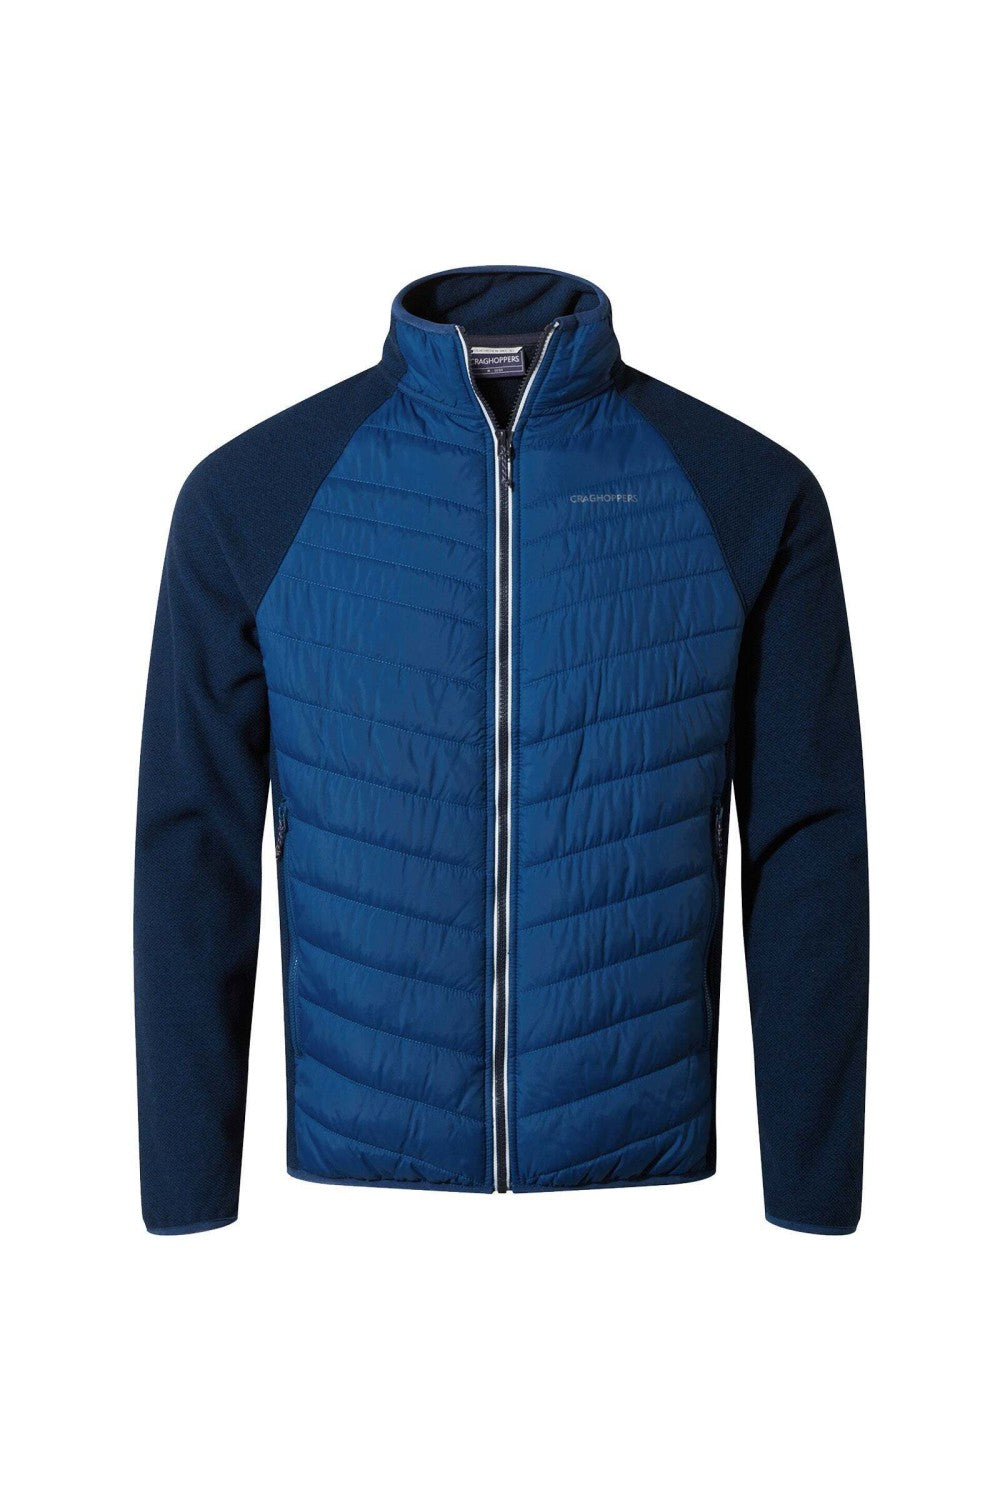 Craghoppers Mens Colby Hybrid Padded Jacket